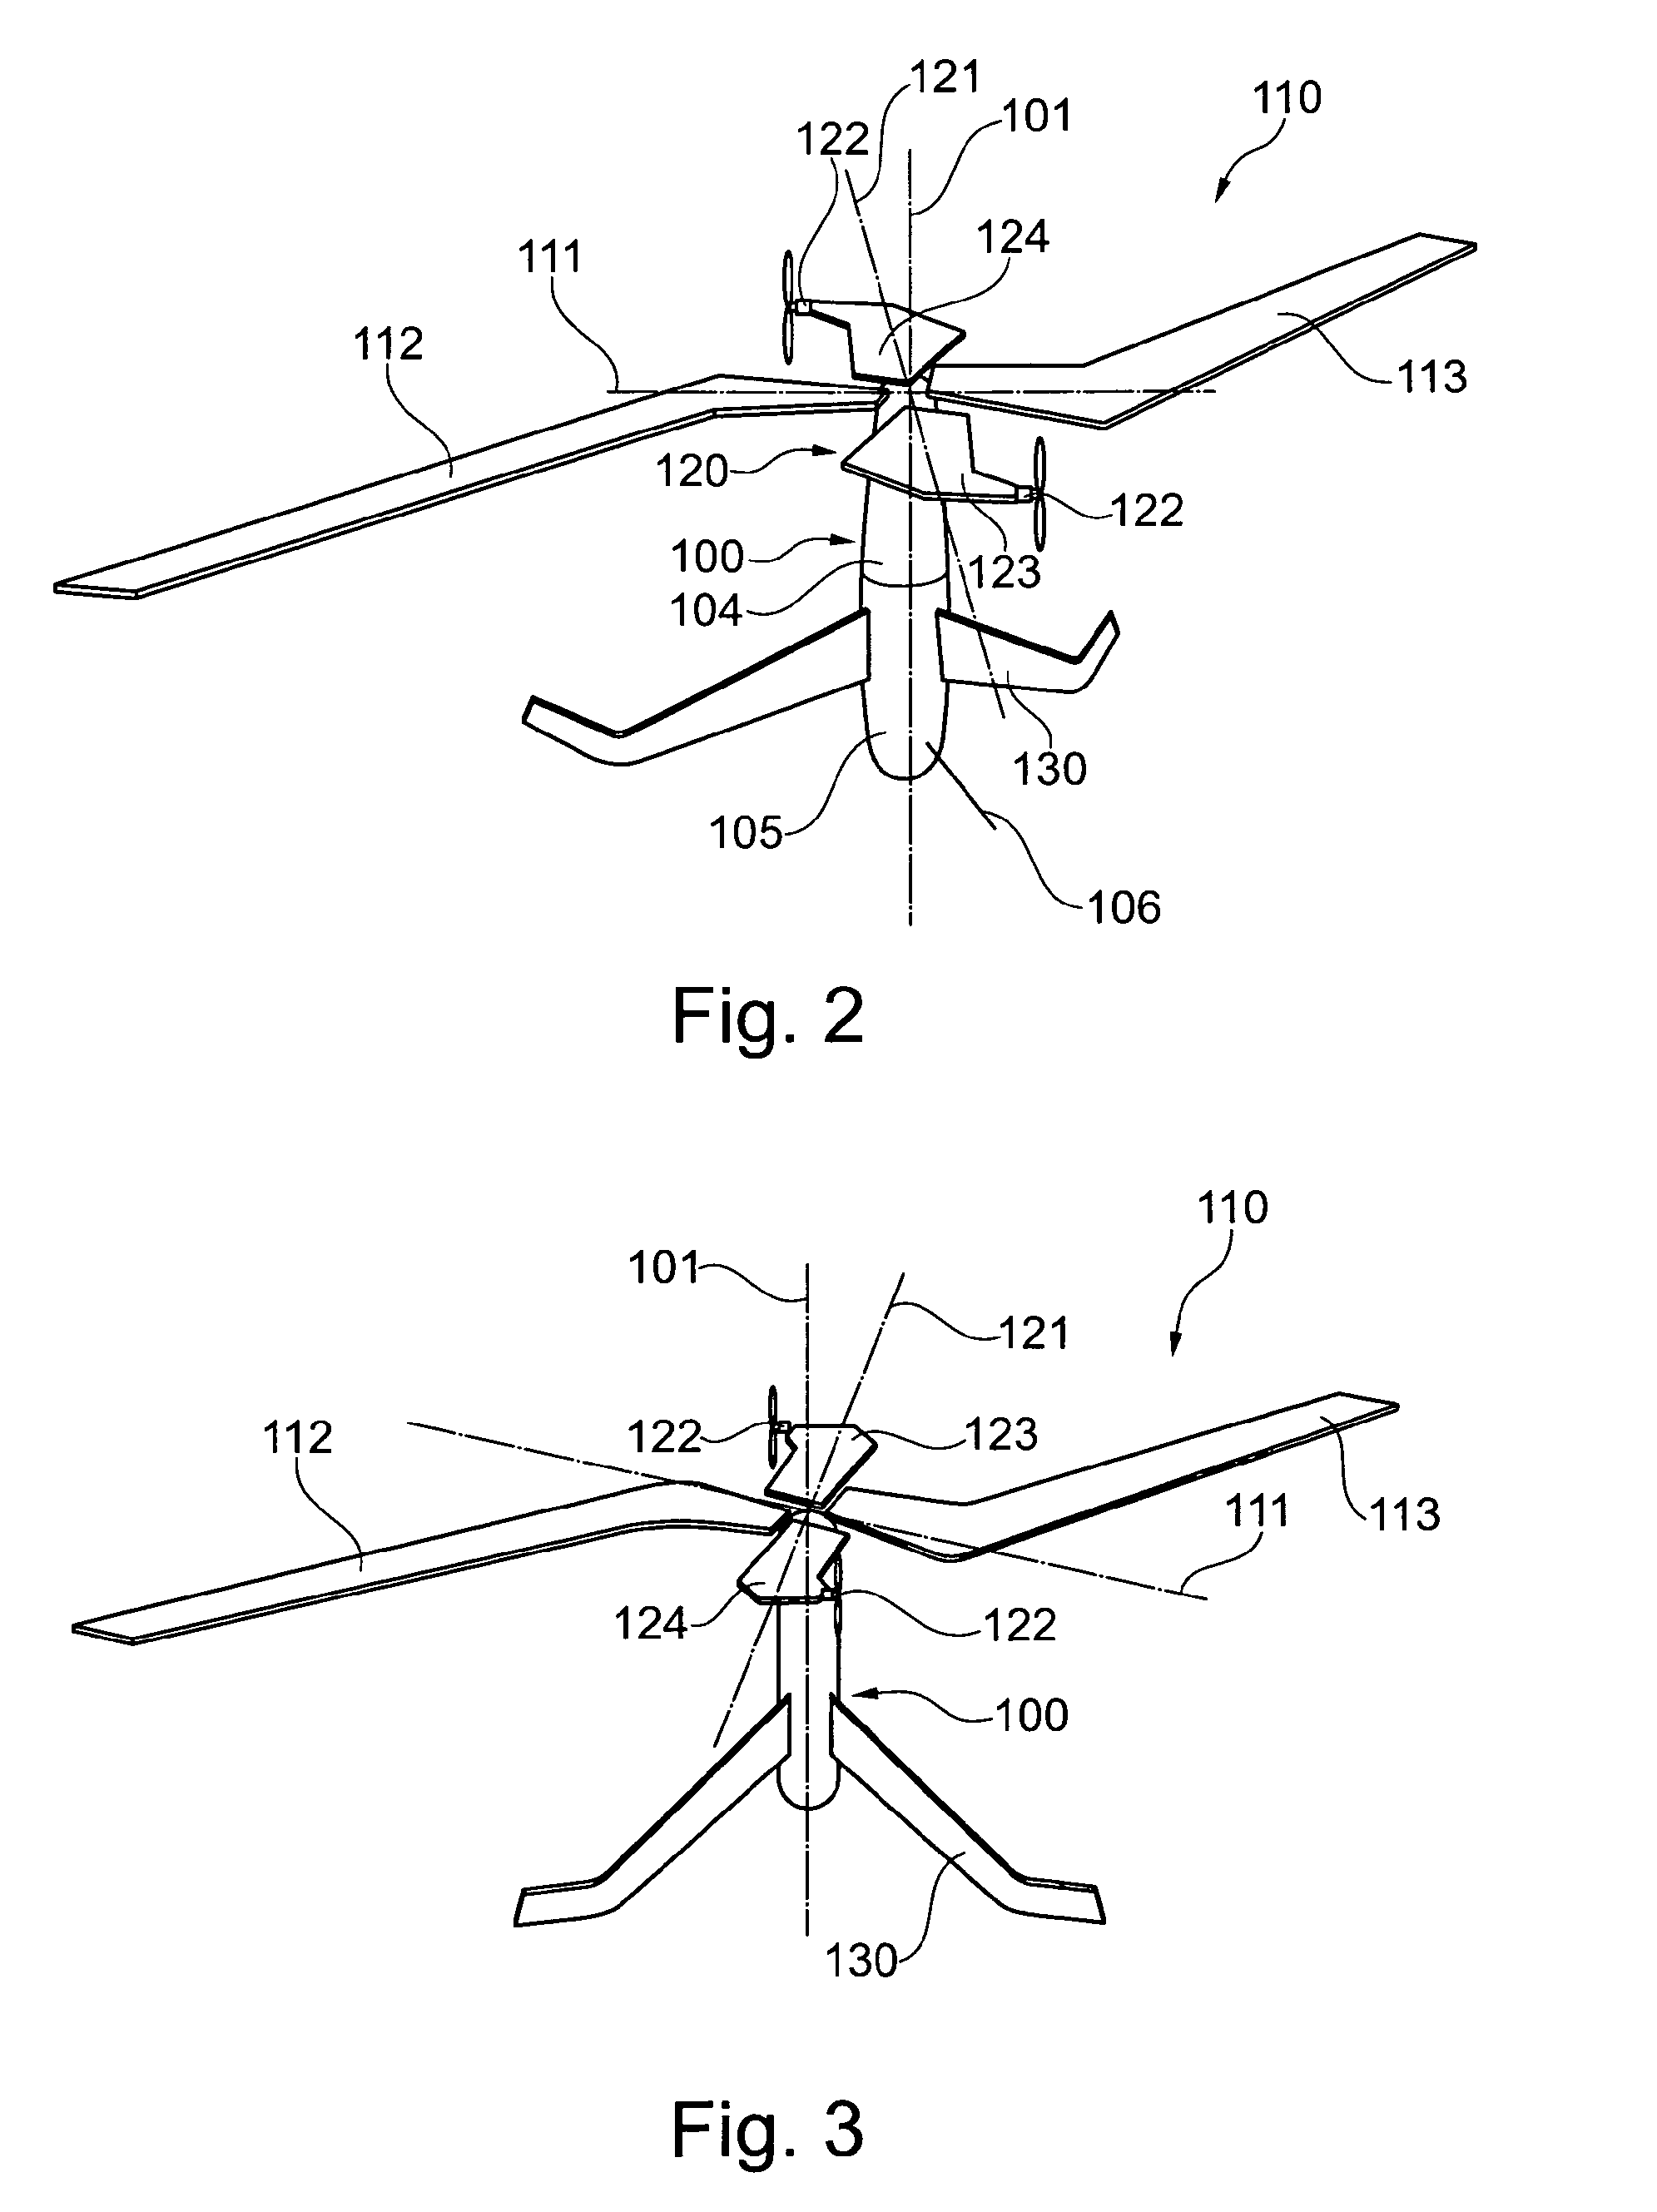 Aircraft for vertical take-off and landing with two wing arrangements